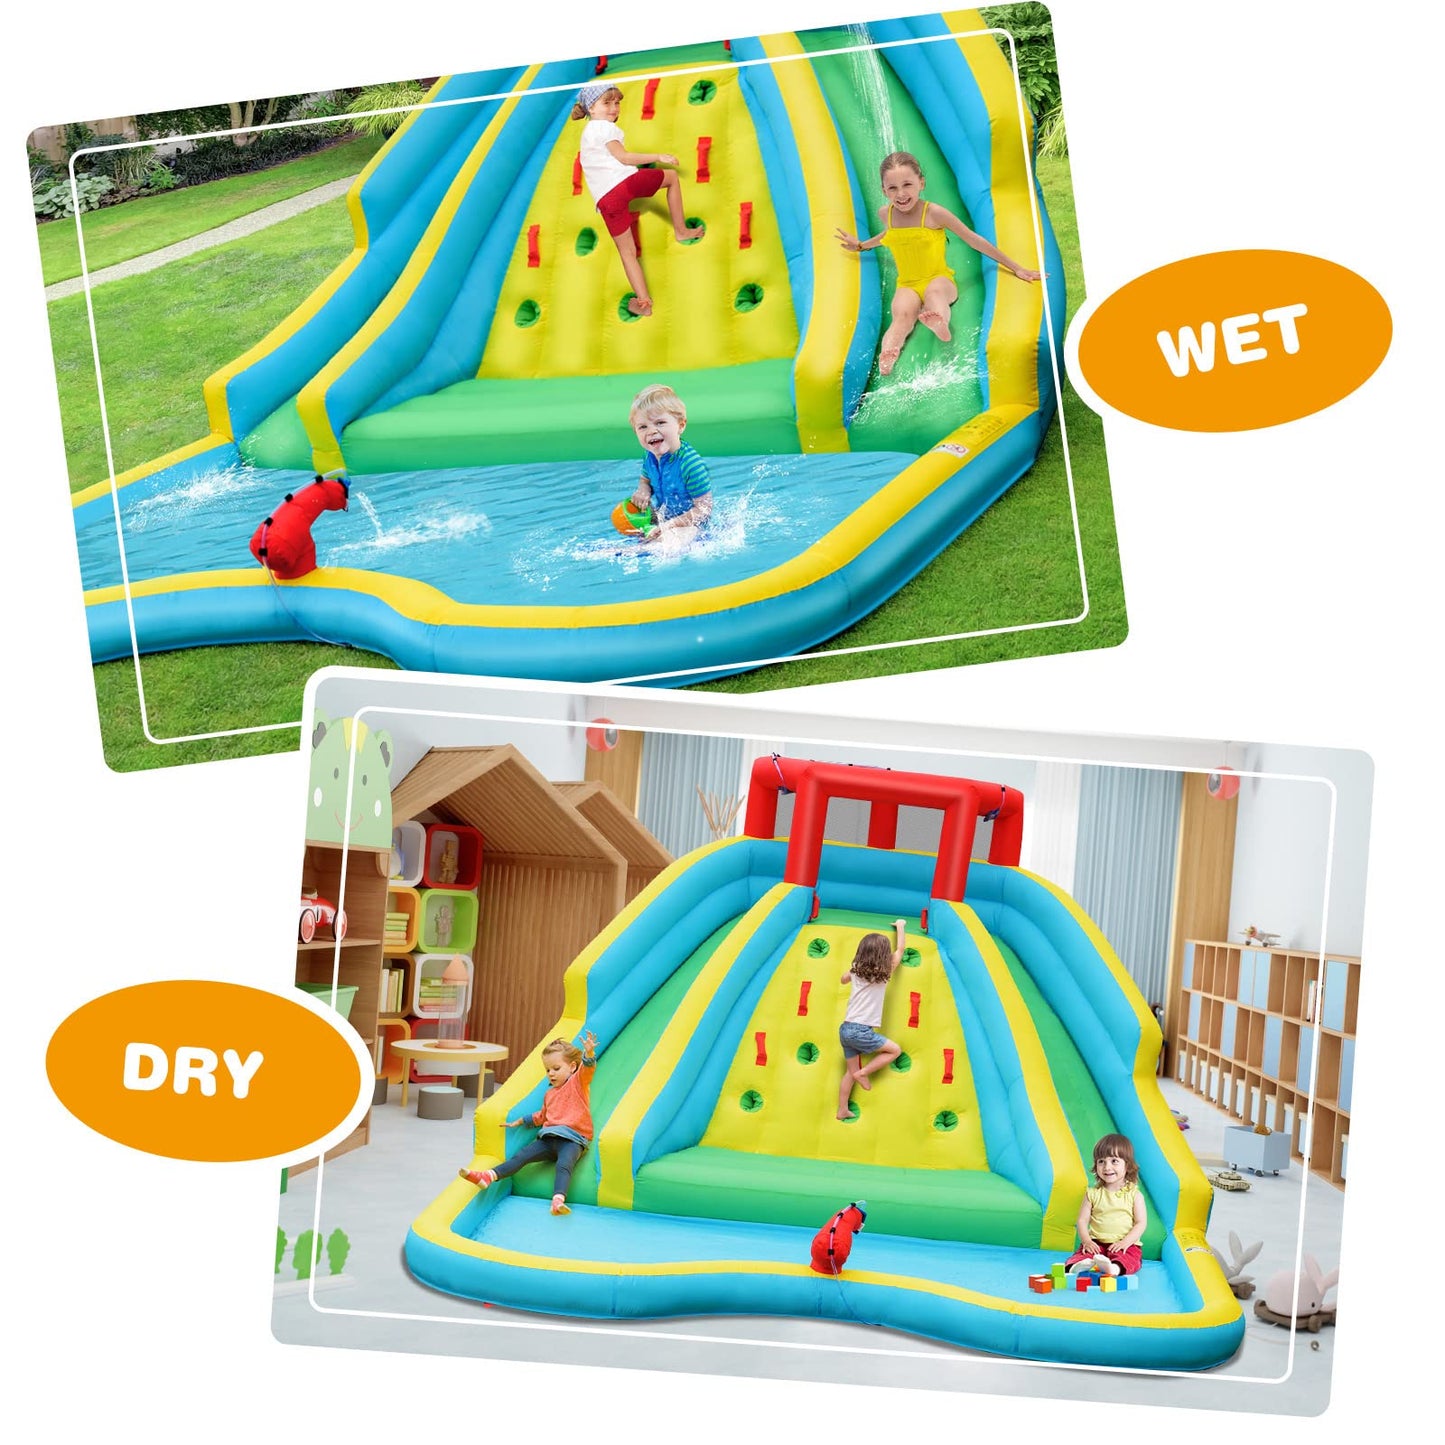 HONEY JOY Inflatable Water Slide, Giant Kids Water Park w/ 2 Long Slides & Climbing Wall, Water Hoses & Cannon, Large Splash Pool, Outdoor Blow Up Waterslides for Backyard(with 750w Blower) With 750w Blower